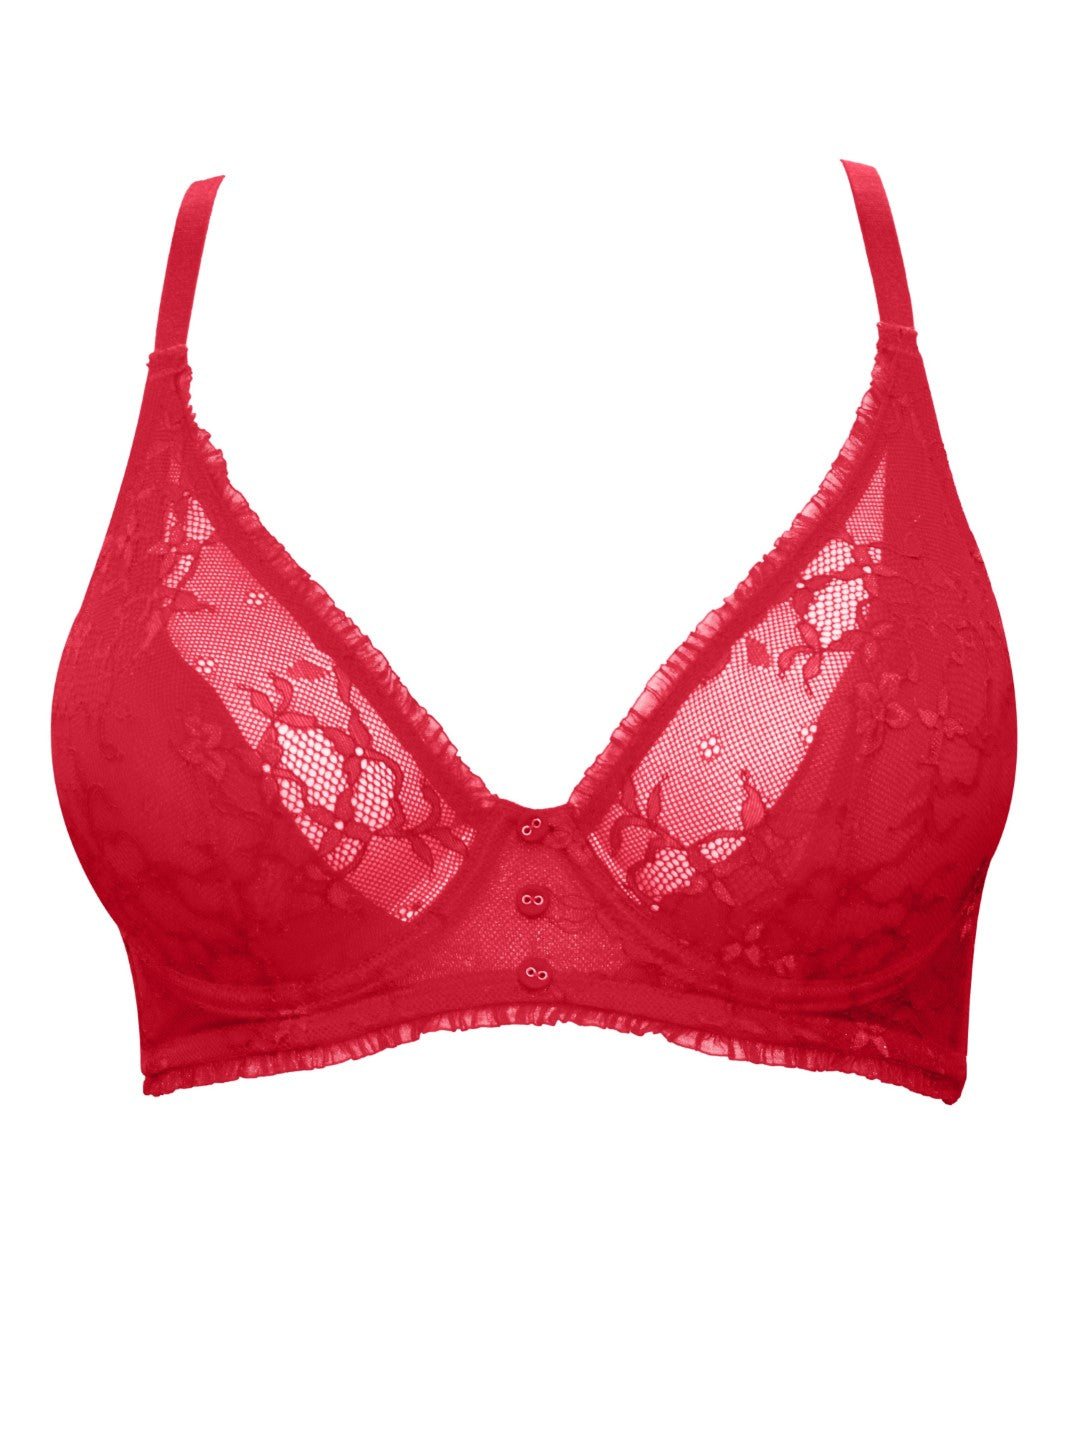 New York Unlined Longline Bra - Racing Red - A1632